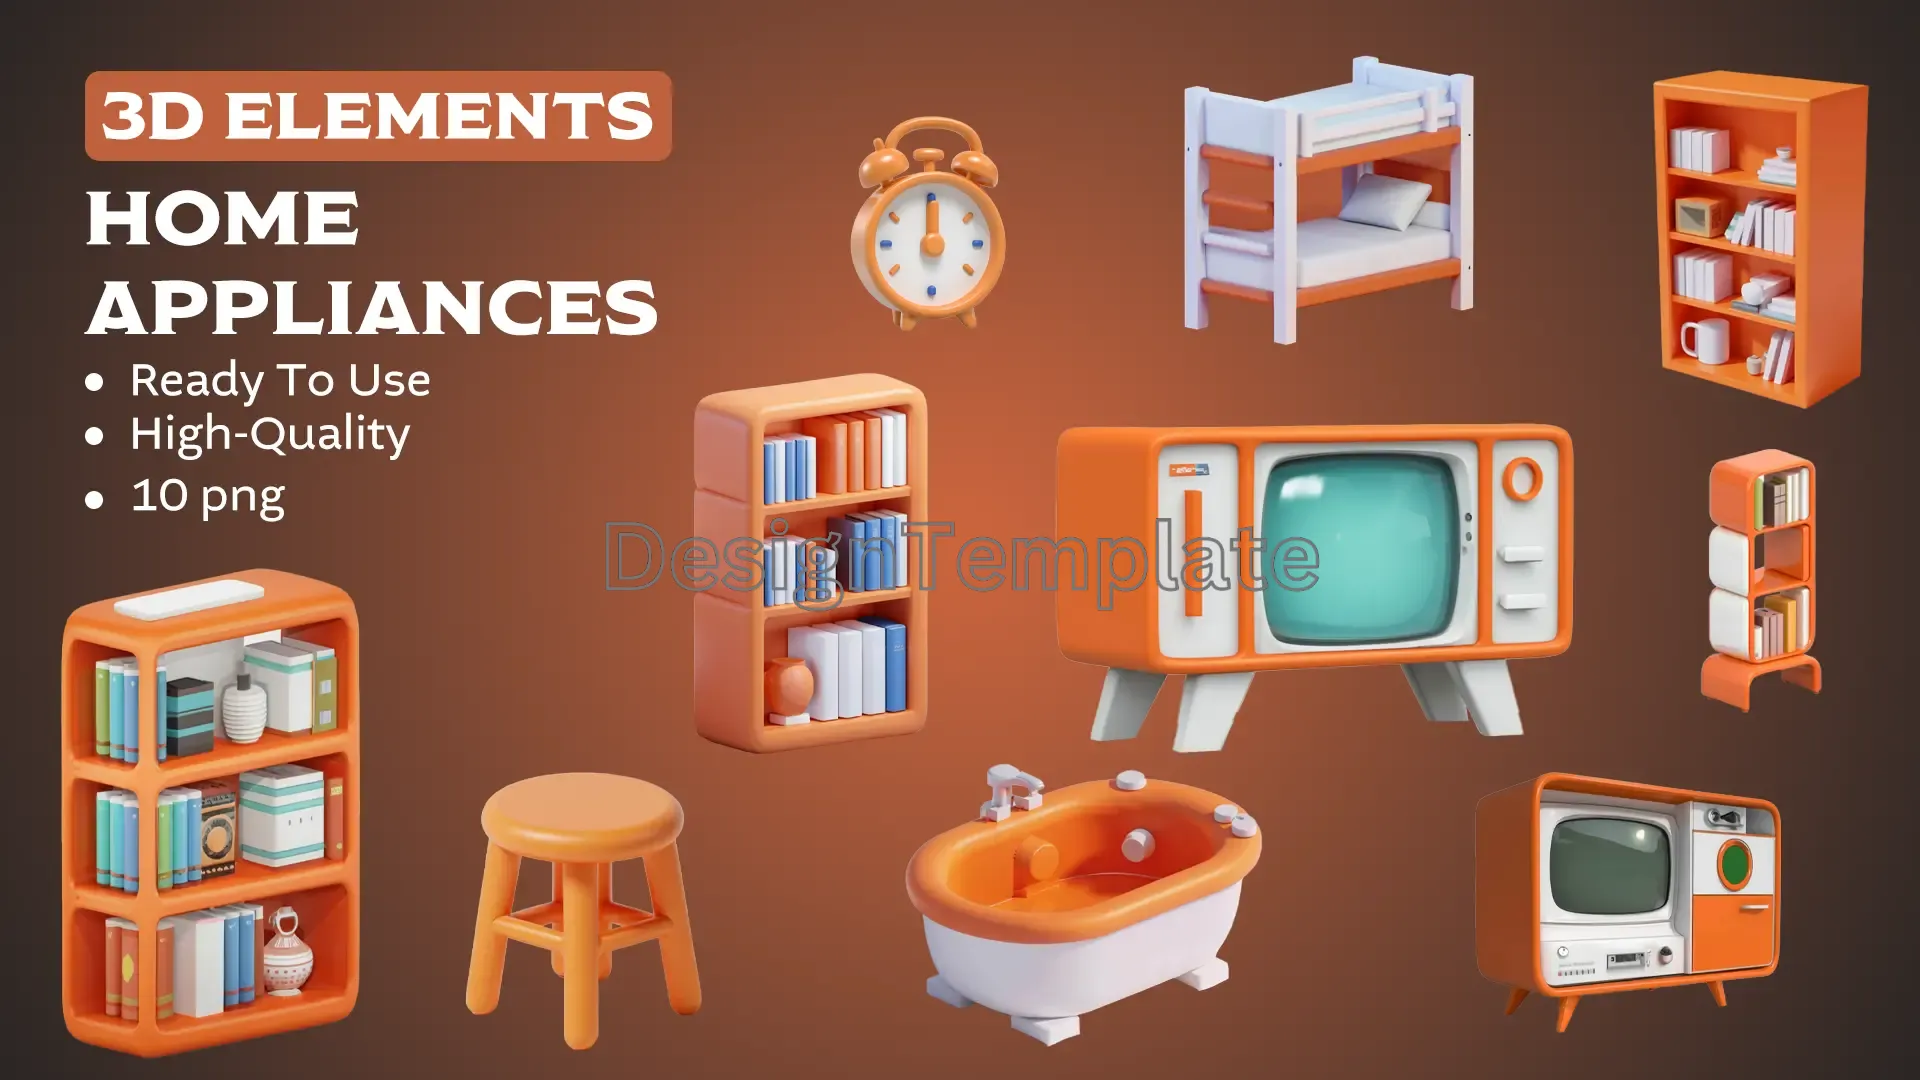 High-Quality Home Appliances 3D Elements Pack